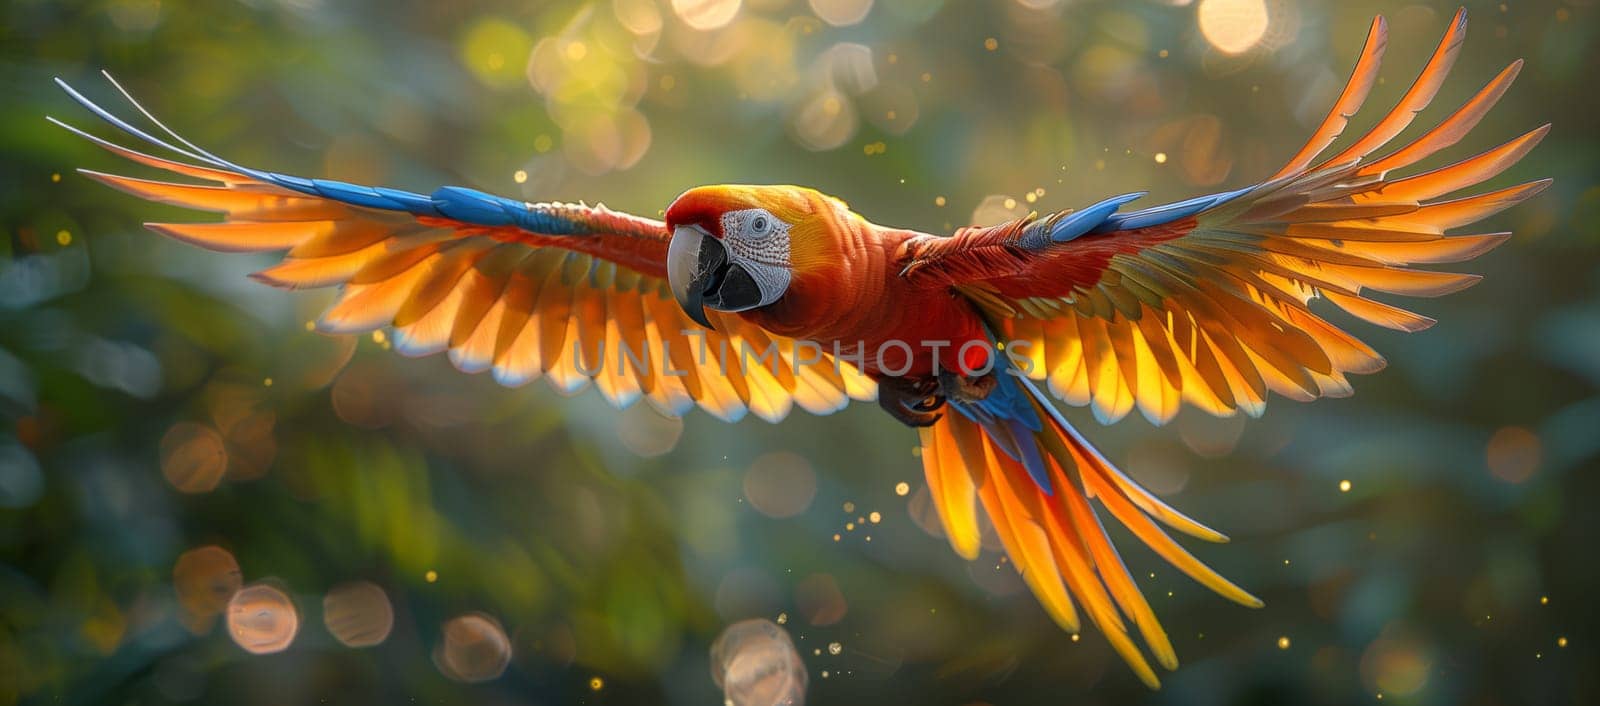 A vibrant parrot, with colorful feathers and wings spread, soars through the air in a captivating display of wildlife in macro photography